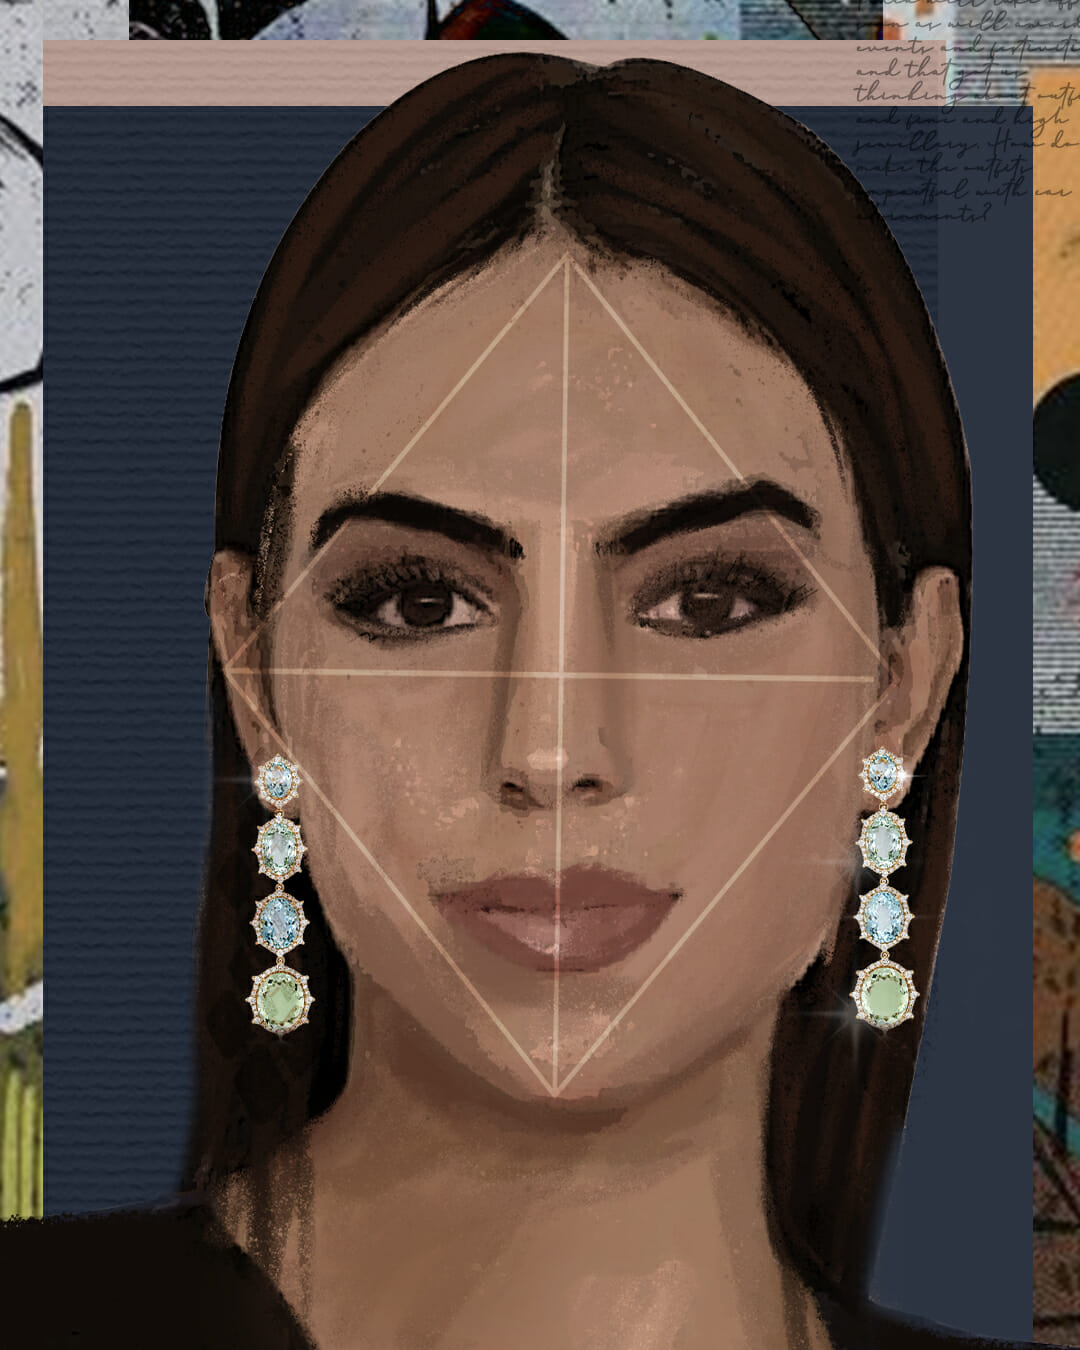 Ultimate Guide: Choosing Earrings to Match Your Face Shape